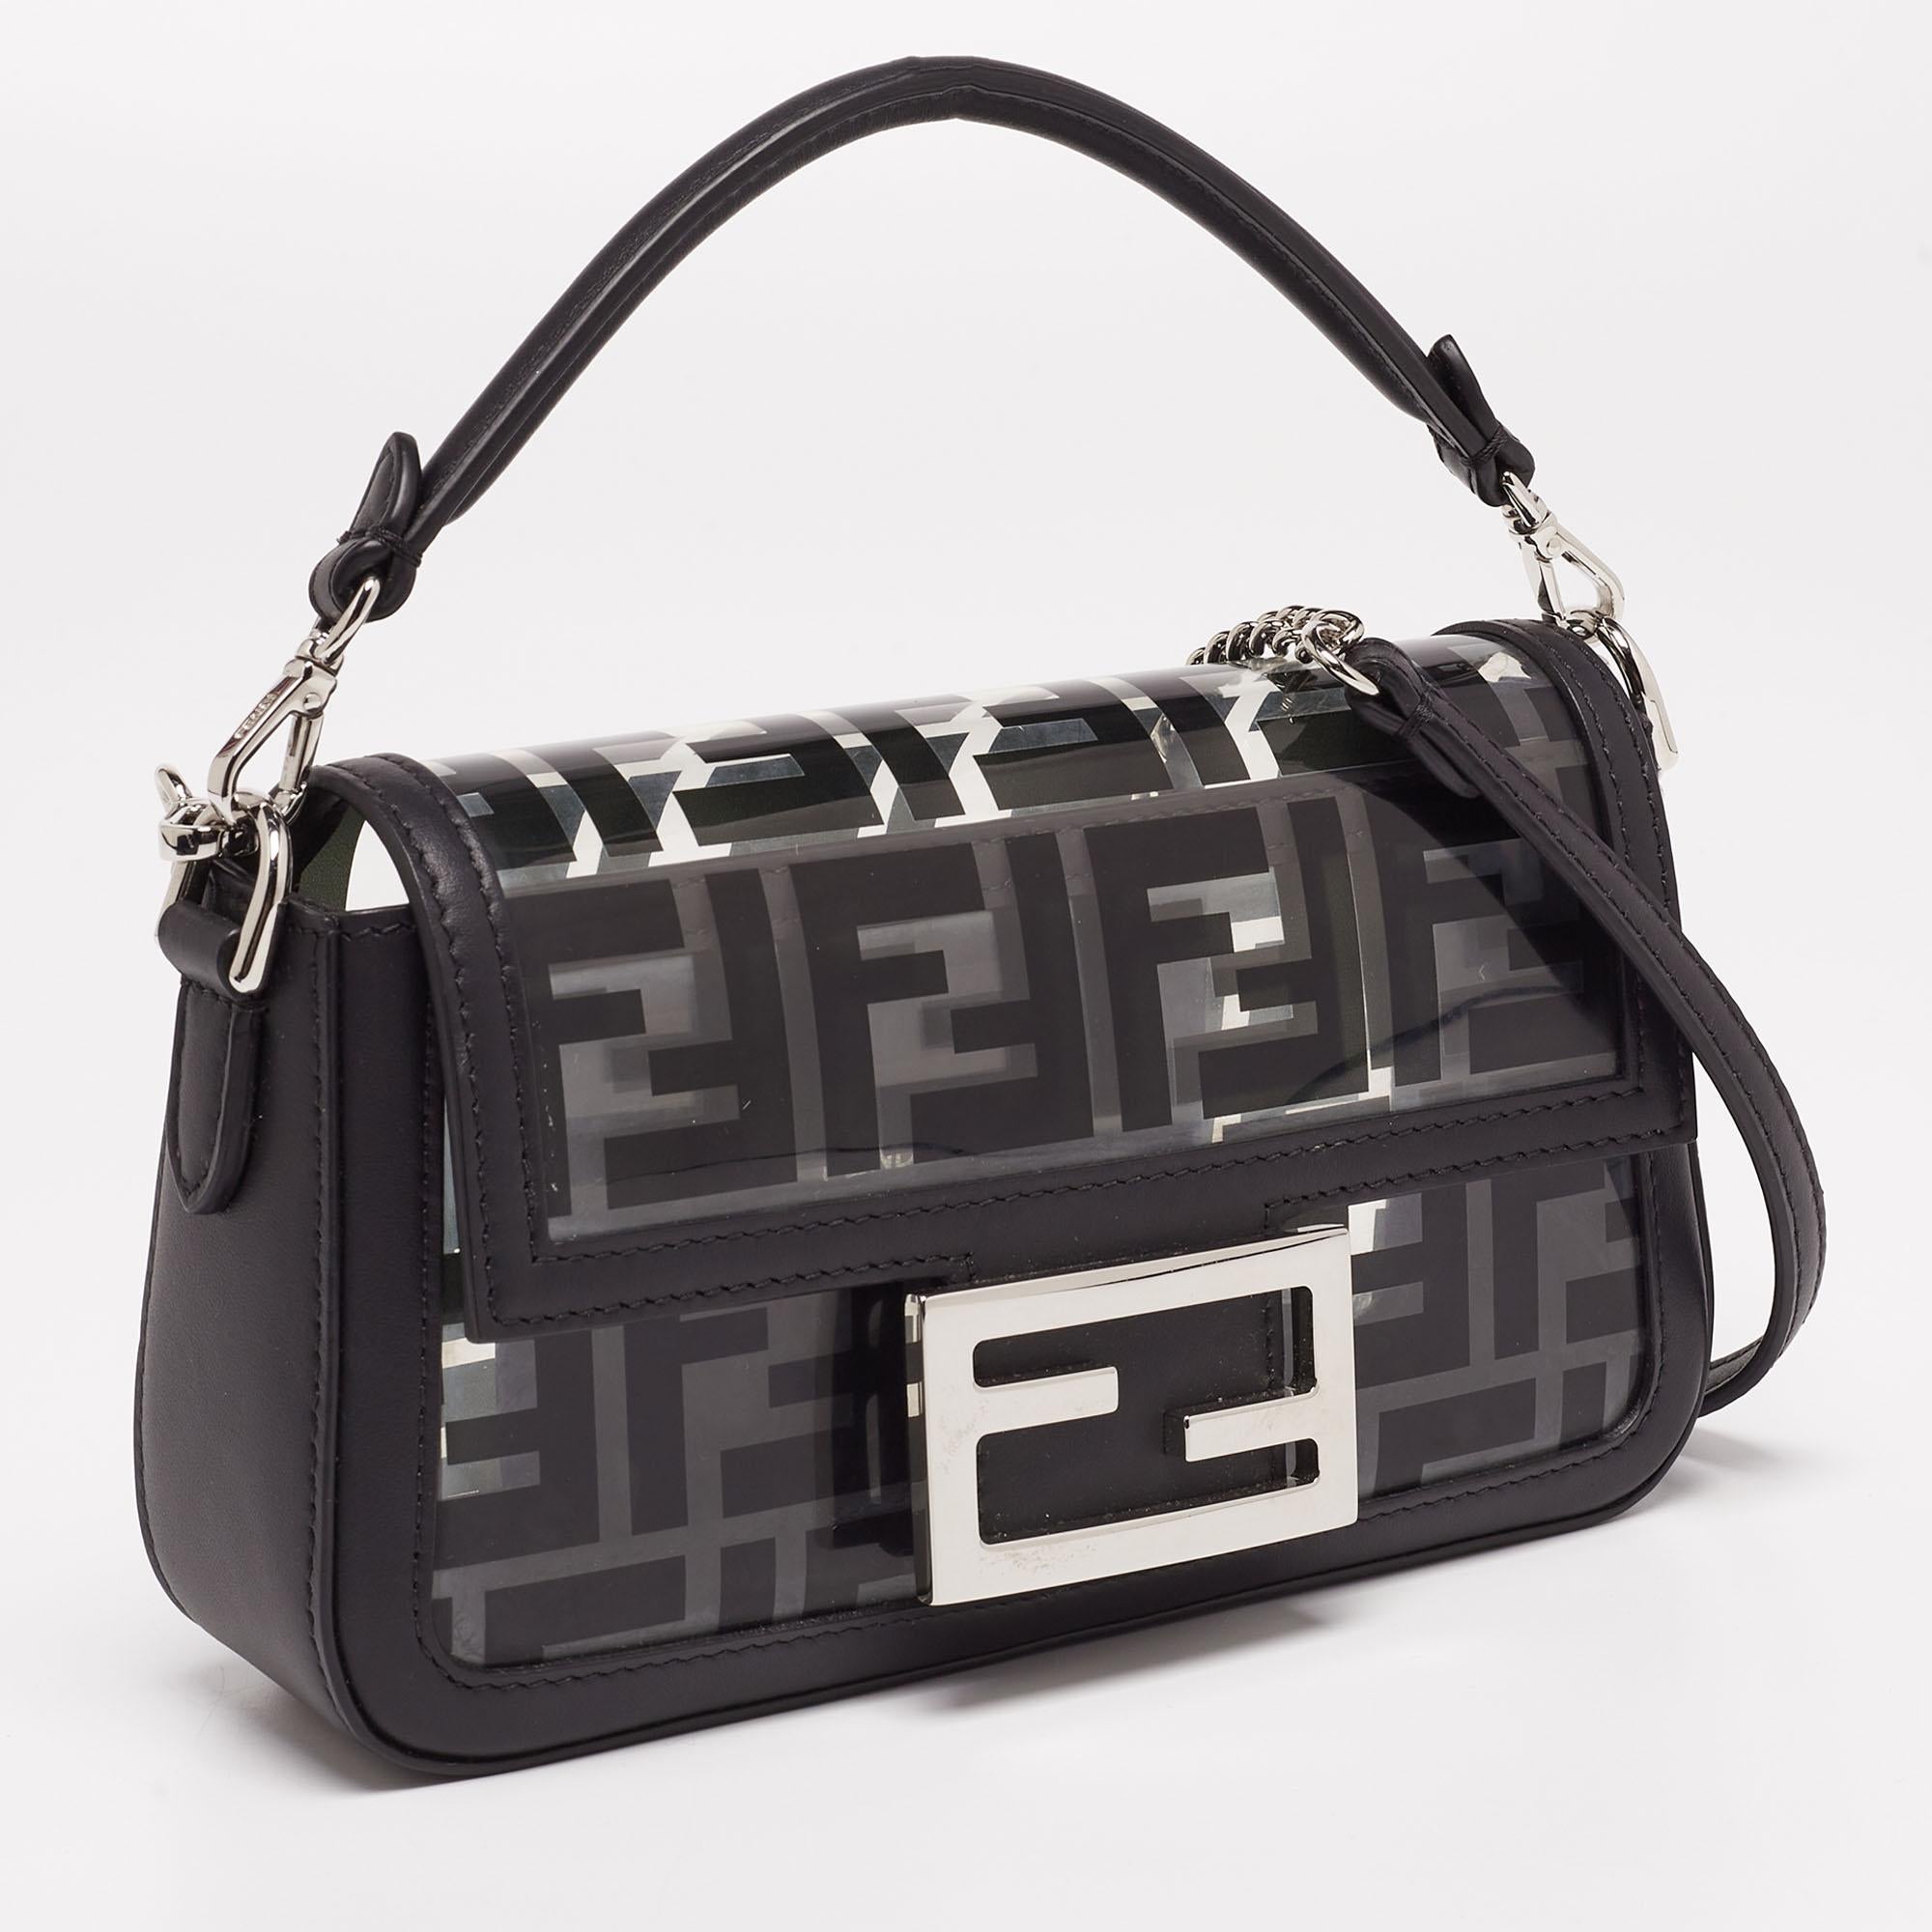 Make a chic style statement with this baguette bag from the House of Fendi. It has been designed using black leather and Zucca PVC on the exterior. It is supported by a single handle and is adorned with silver-tone hardware. Carry this Fendi